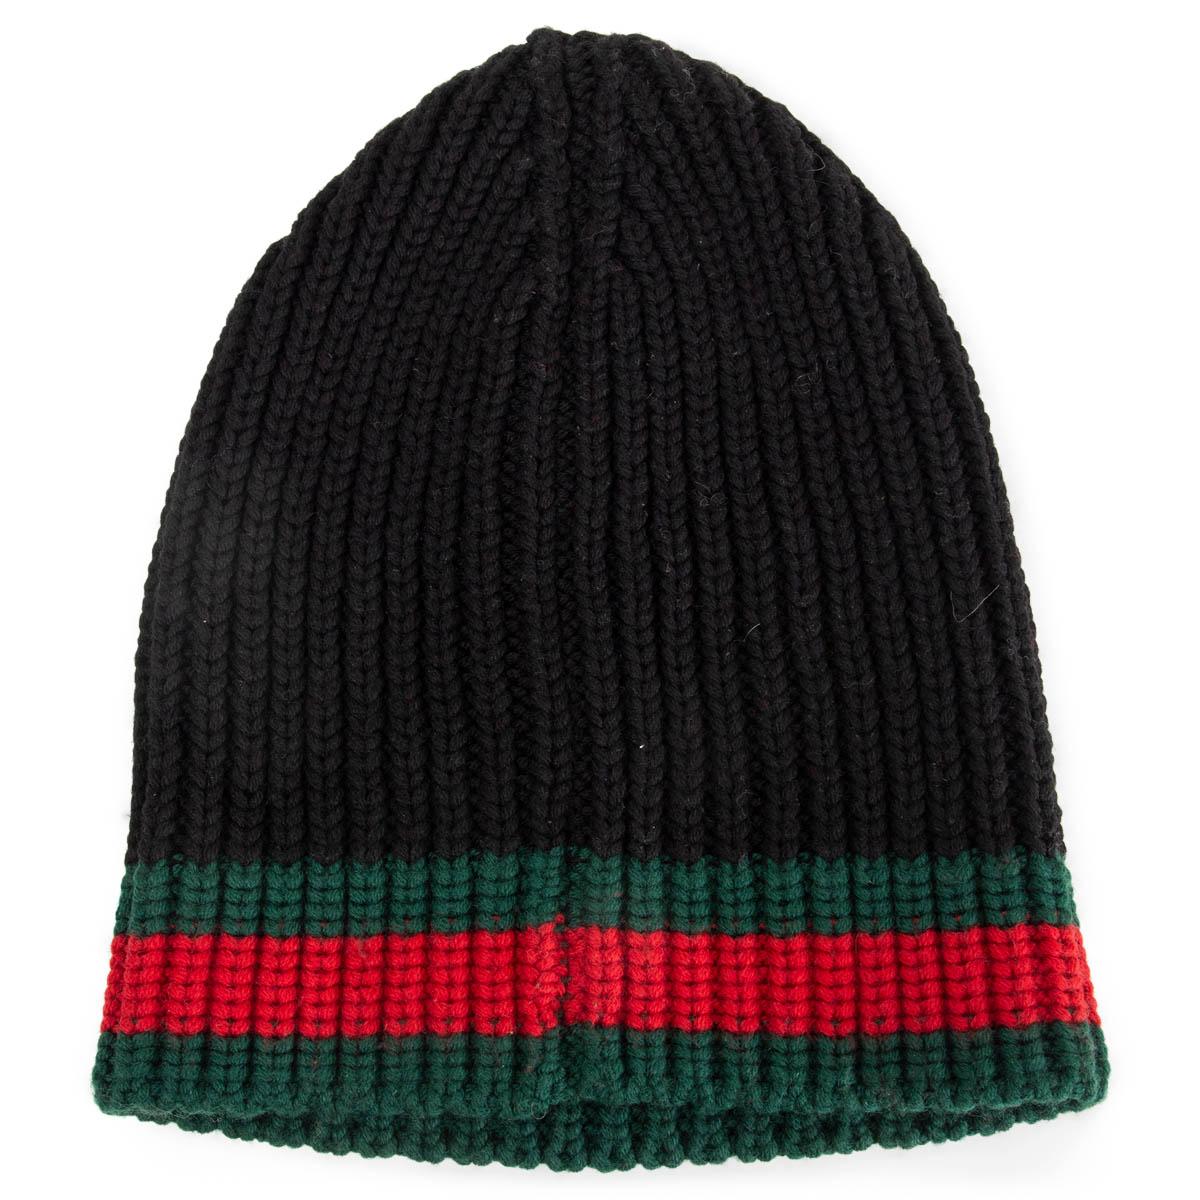 100% authentic Gucci striped wool hat in a rib construction with our Web detail in black, green and red. Has been worn once and is in excellent condition. 

Measurements
Tag Size	M / 58

All our listings include only the listed item unless otherwise